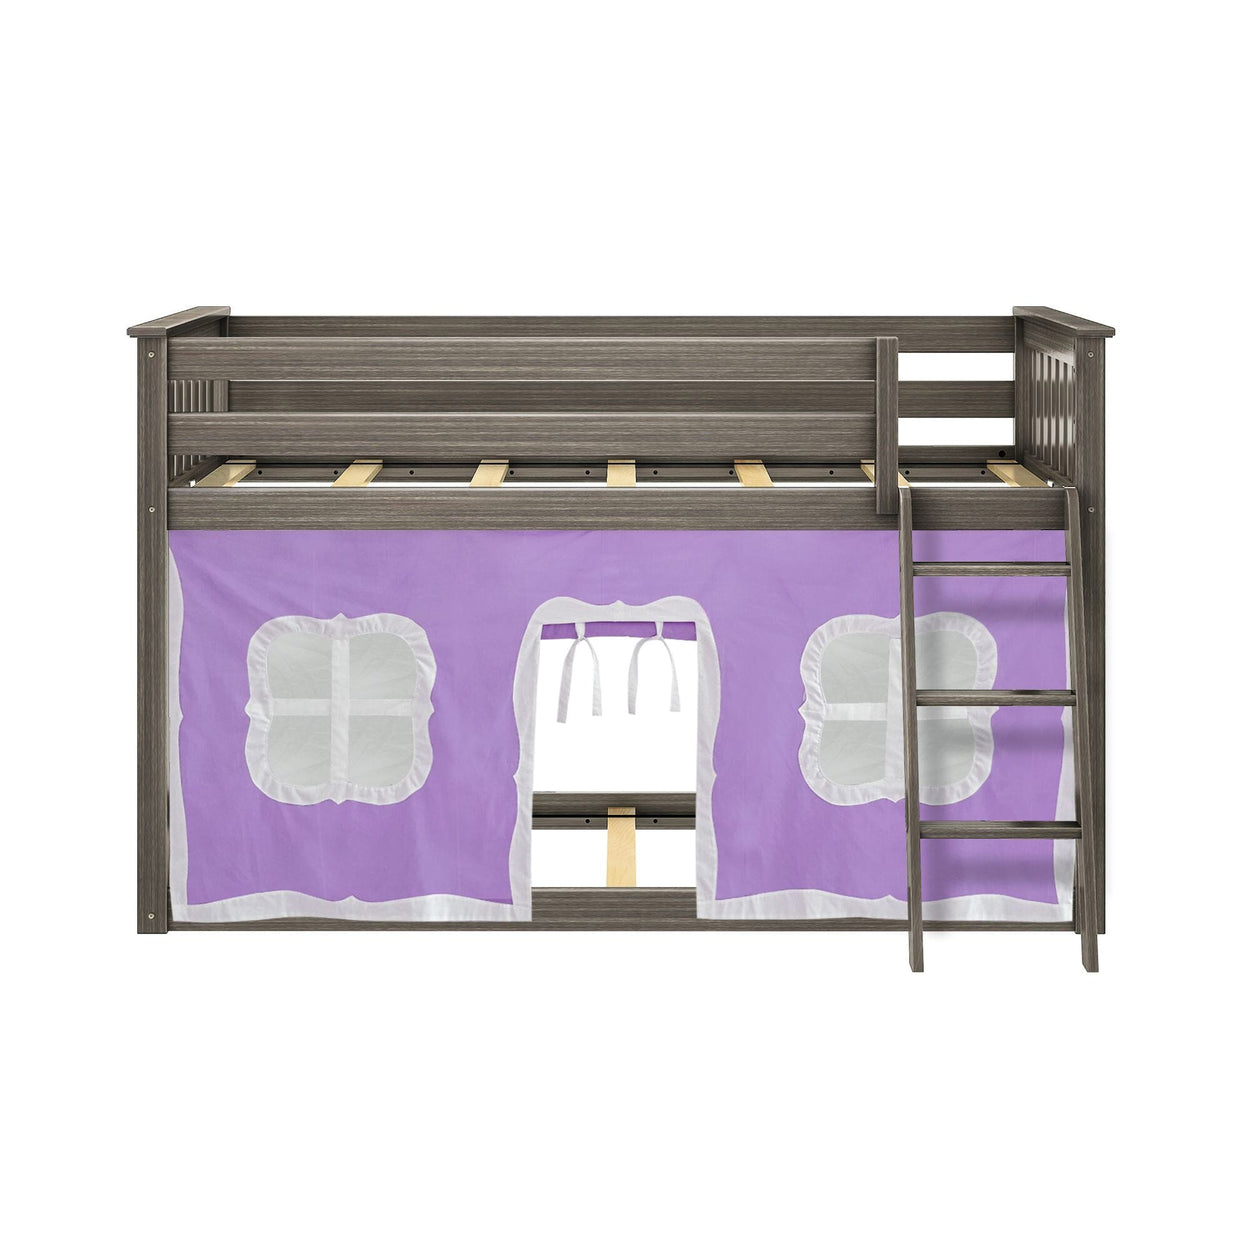 180214151061 : Bunk Beds Twin-Size Low Bunk Bed With Curtain, Clay + Purple Curtain